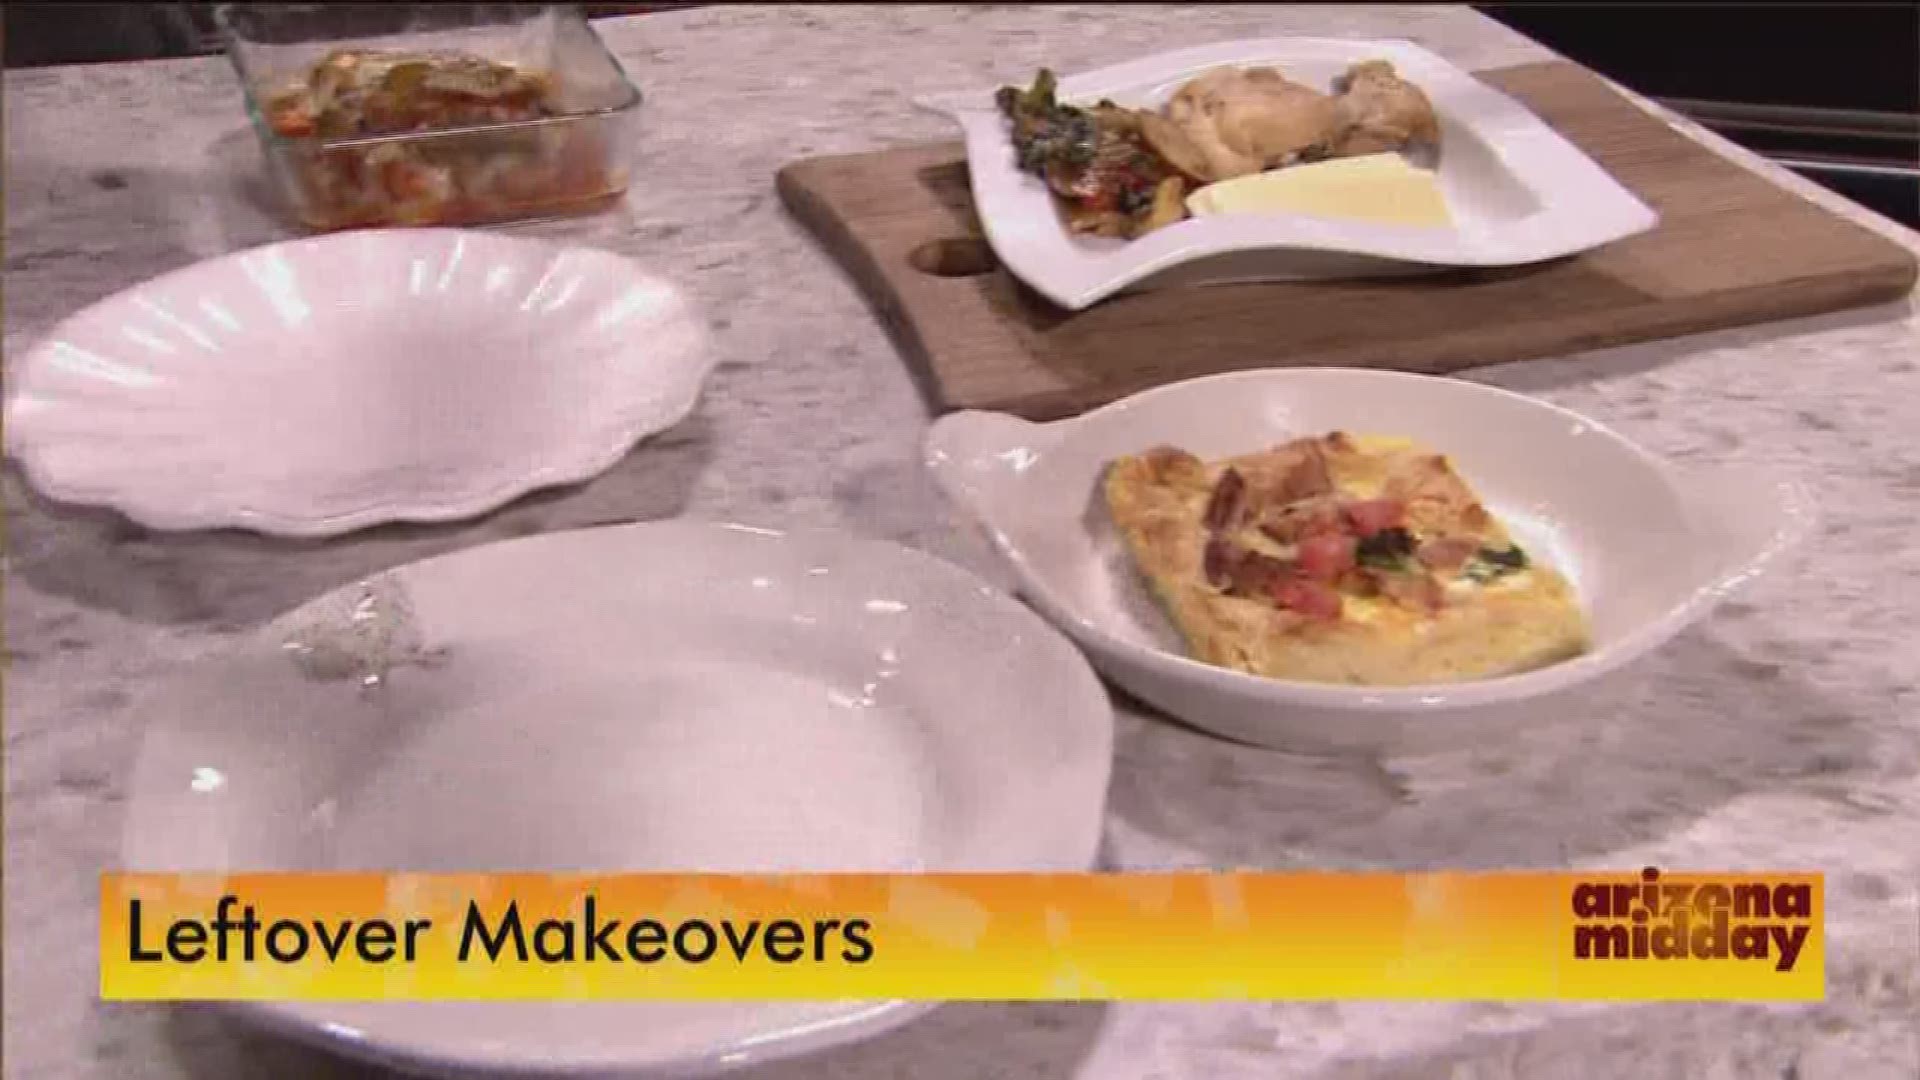 Don't throw away those leftovers! Jan shows us how you can make 6 meals before your vegetables go bad!